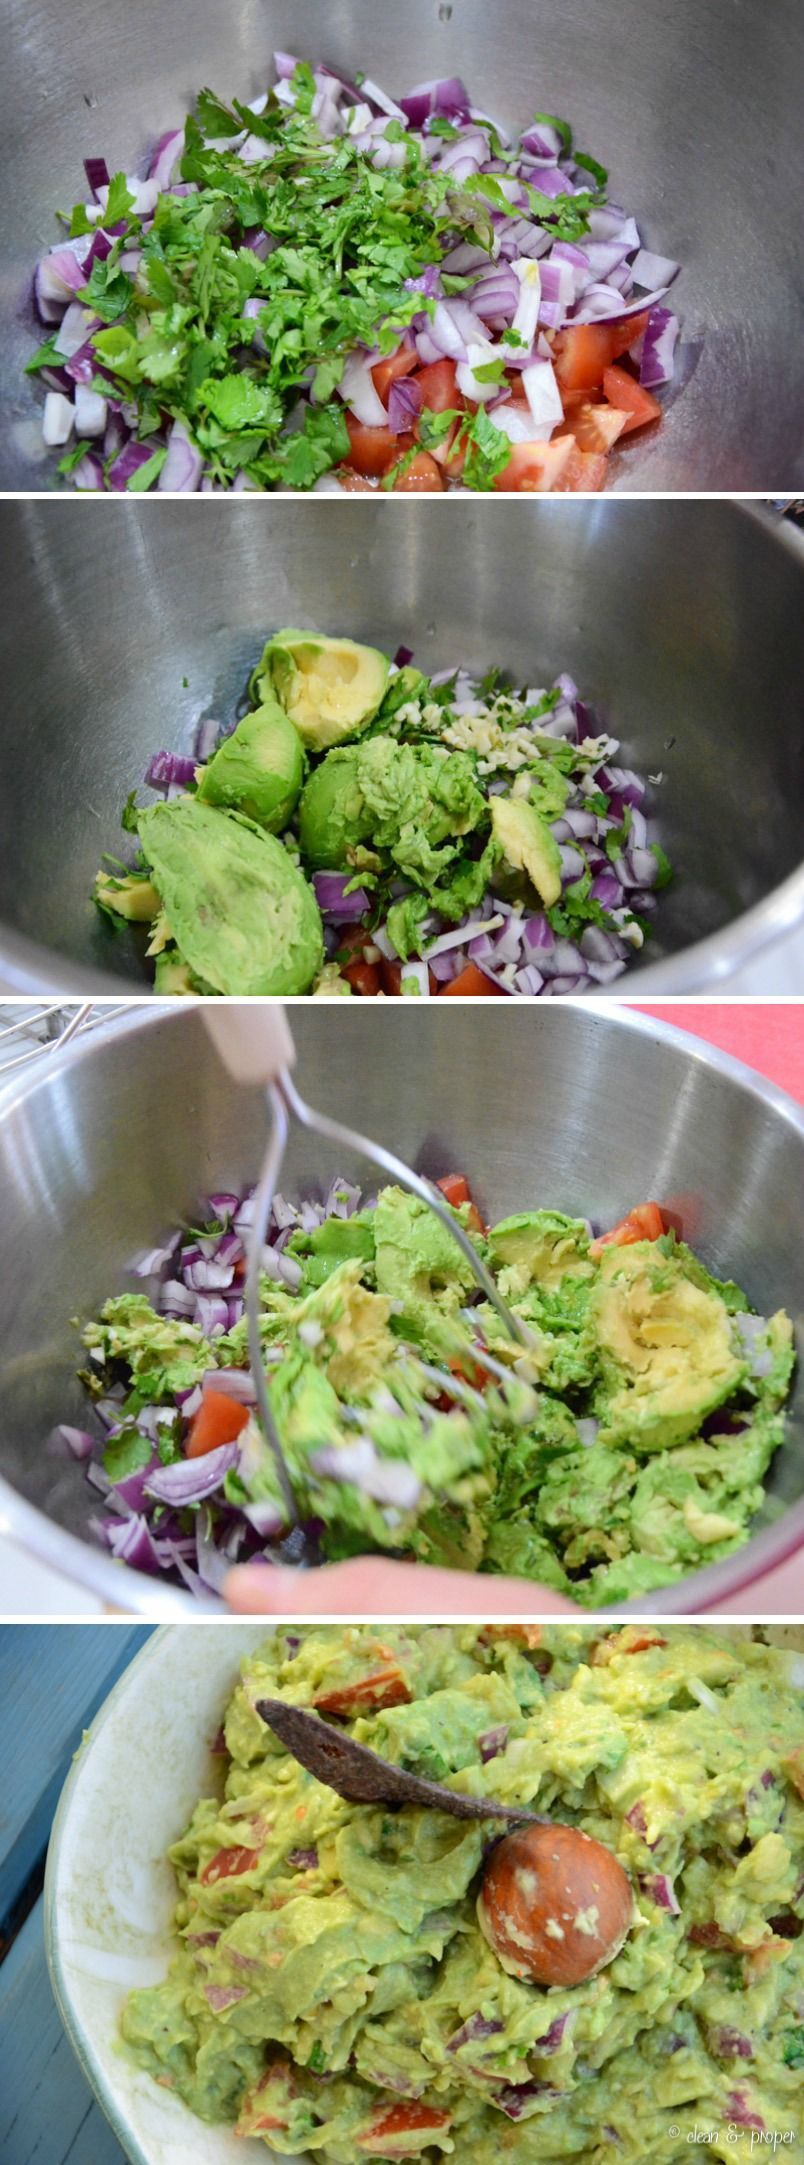 Delicious and Healthy Guacamole Recipe! Easy to Make For Parties or Enjoy It All Yourself!